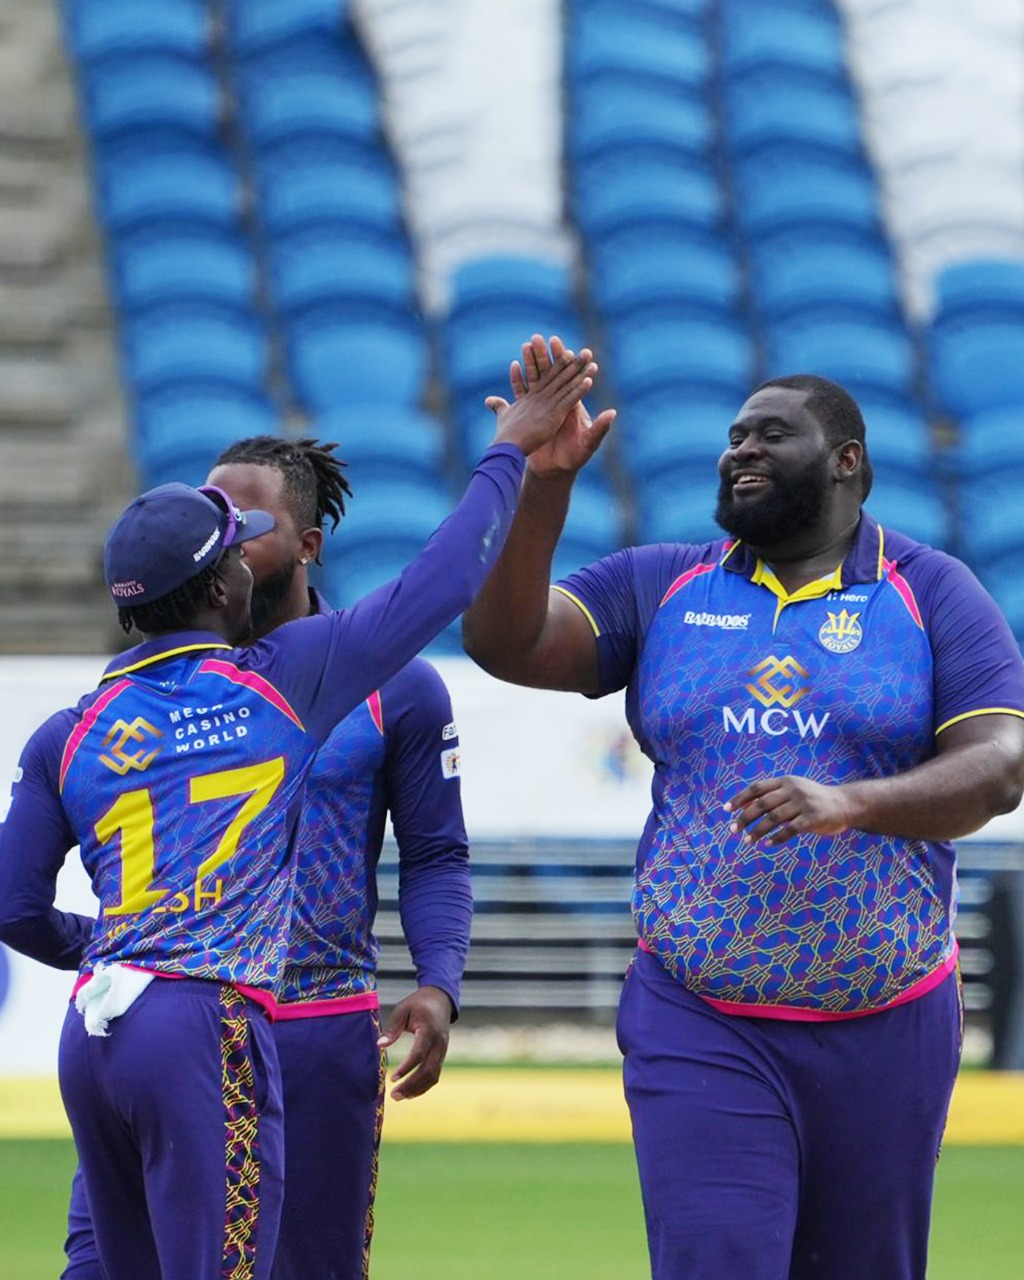 CPL 2022: GAW vs BR Live Streaming: When & How to watch Guyana Amazon Warriors vs Barbados Royals LIVE in India – Check out Caribbean Premier League 2022